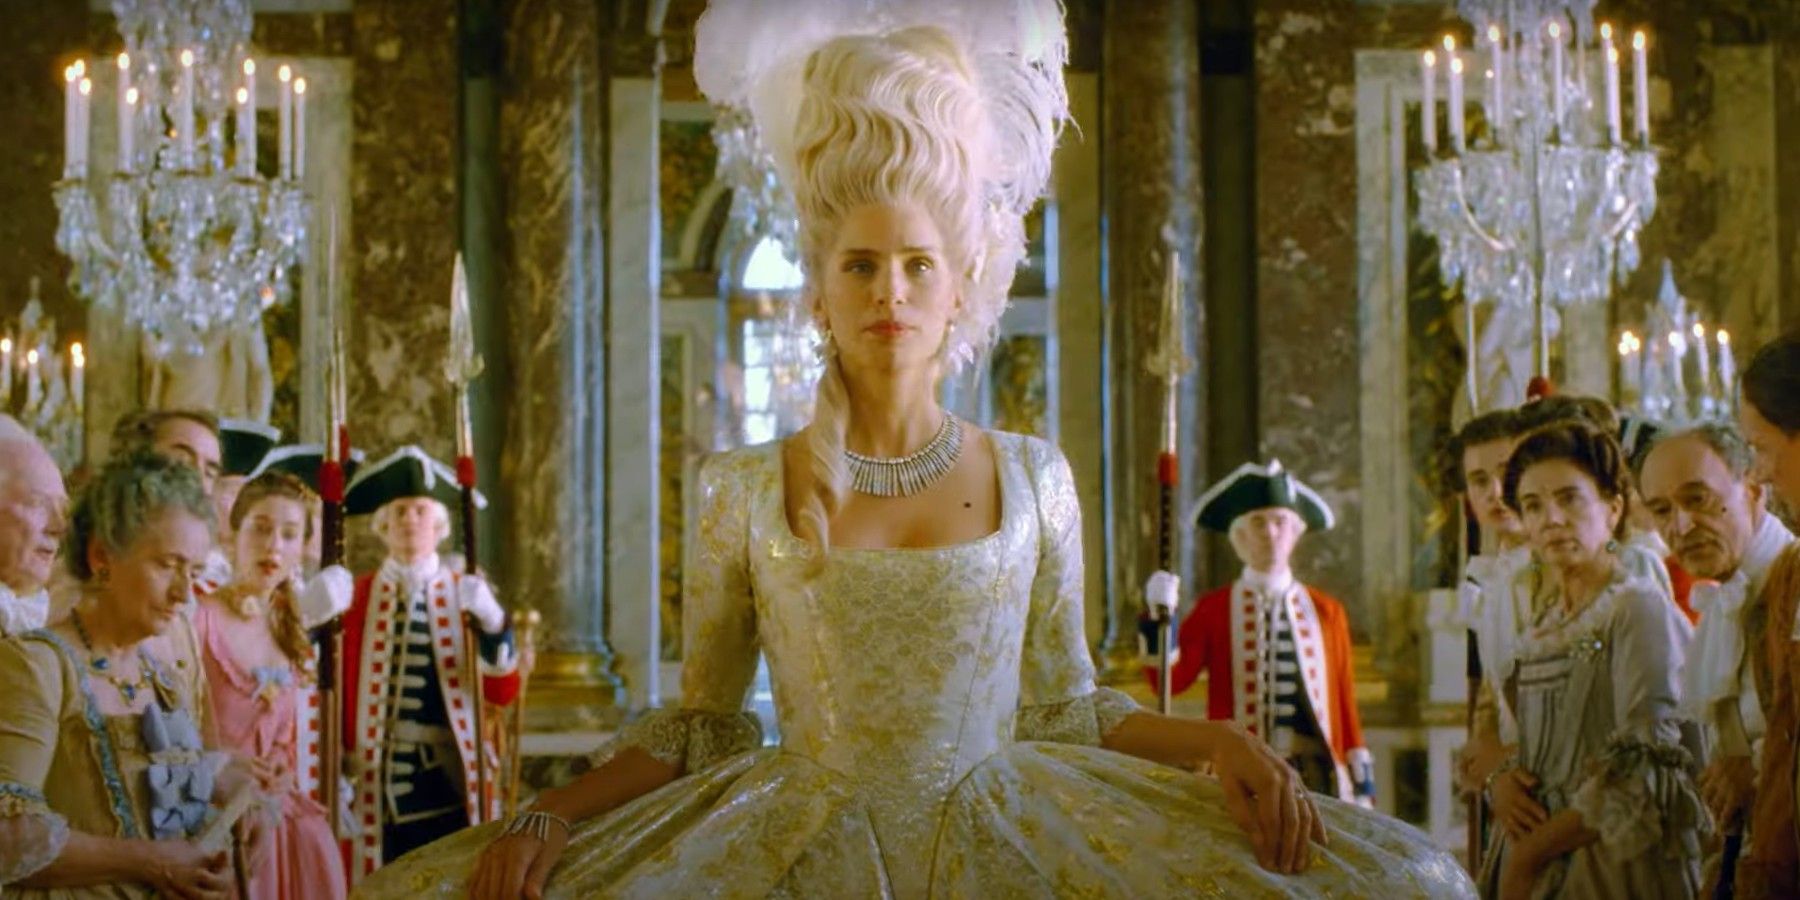 Maiwenn walking the French hall in a period costume in Jeanne du Barry